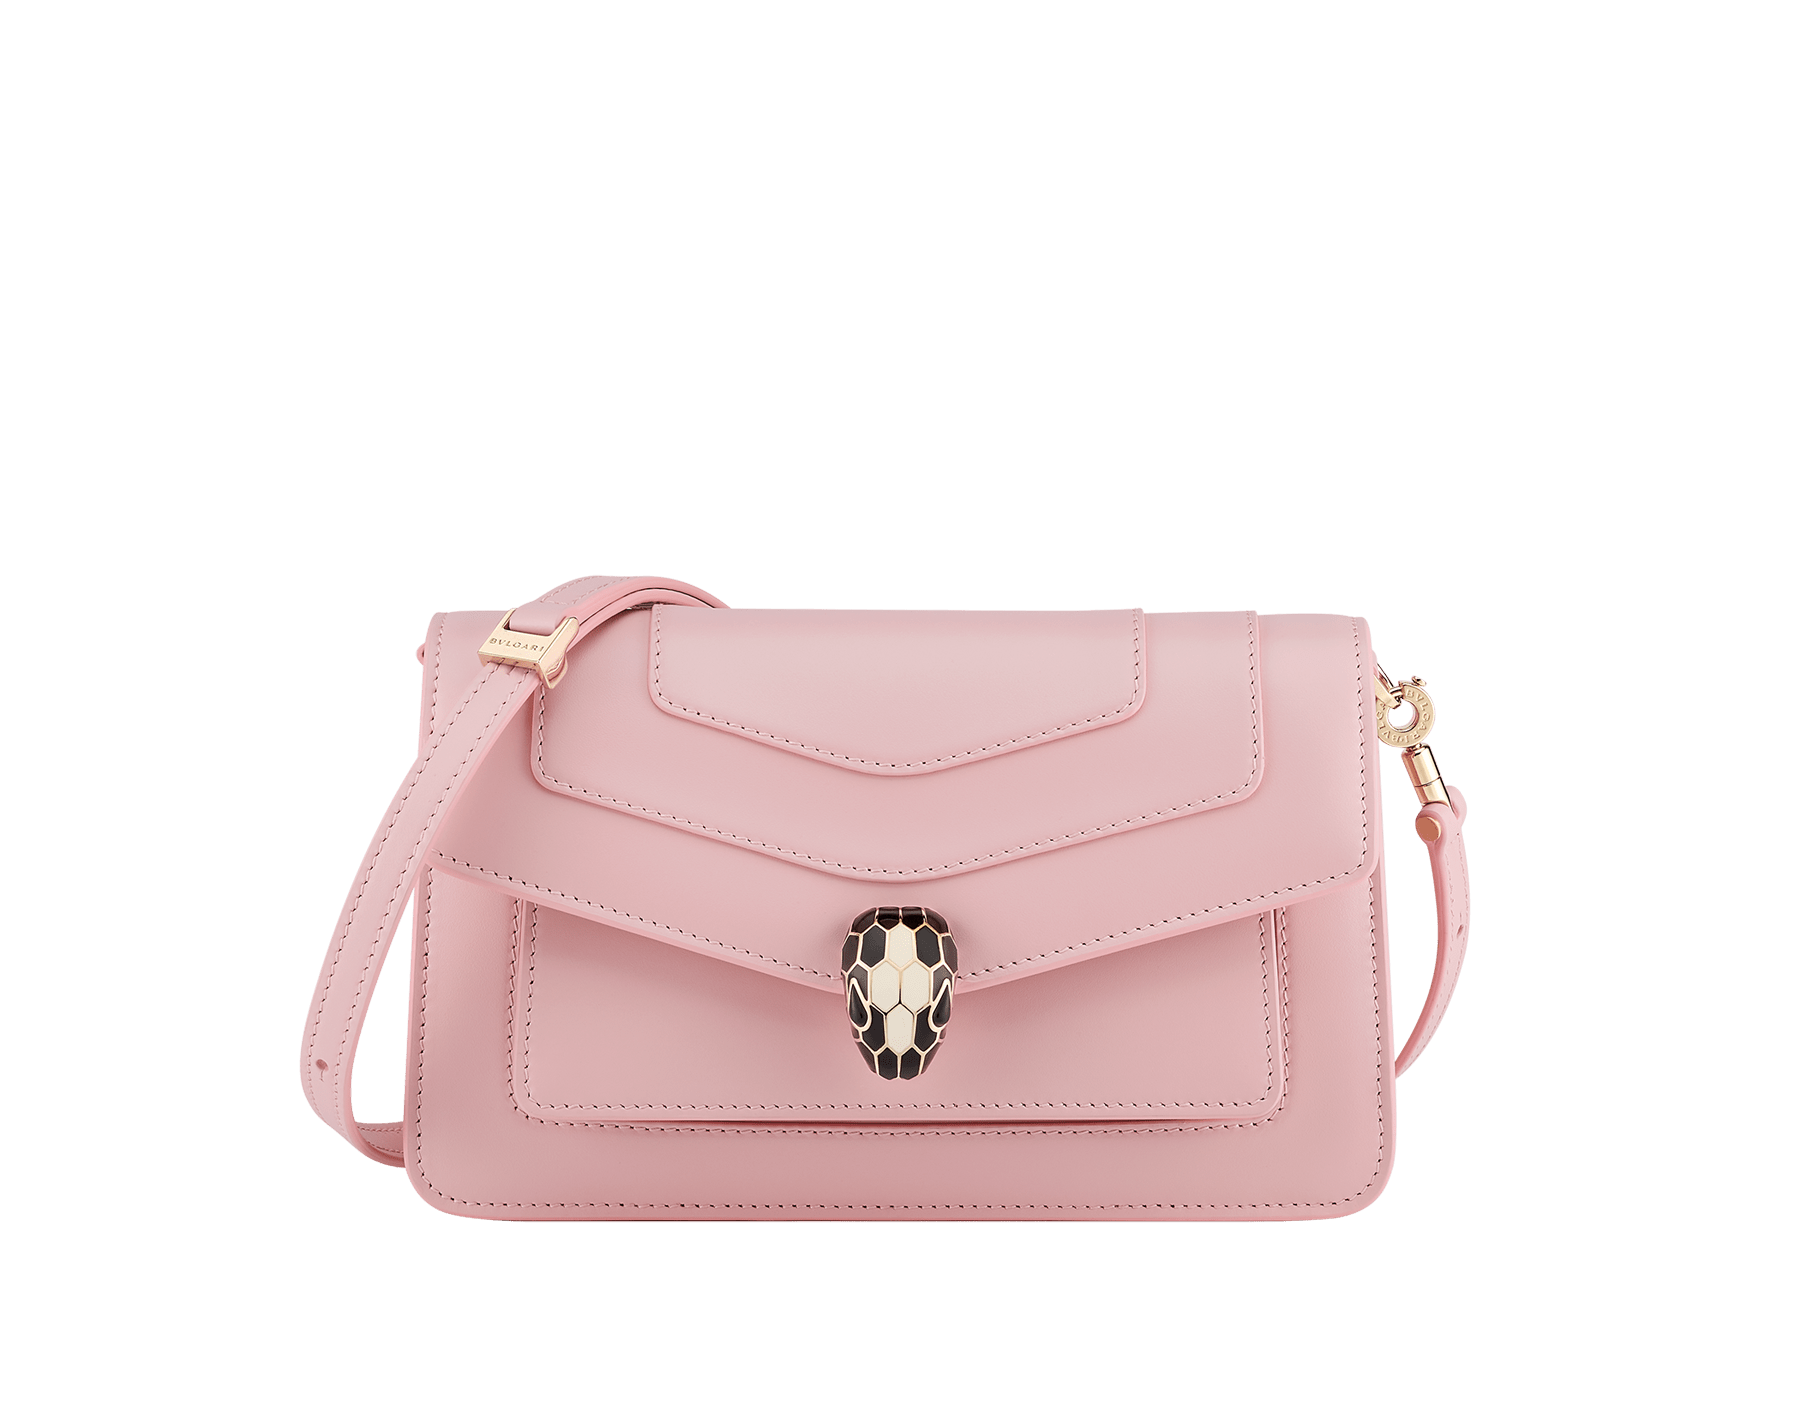 Serpenti Forever East-West small shoulder bag in primrose quartz pink calf leather with heather amethyst pink grosgrain lining. Captivating snakehead magnetic closure in light gold-plated brass embellished with black and white agate enamel scales and black onyx eyes. 1237-Cla image 1